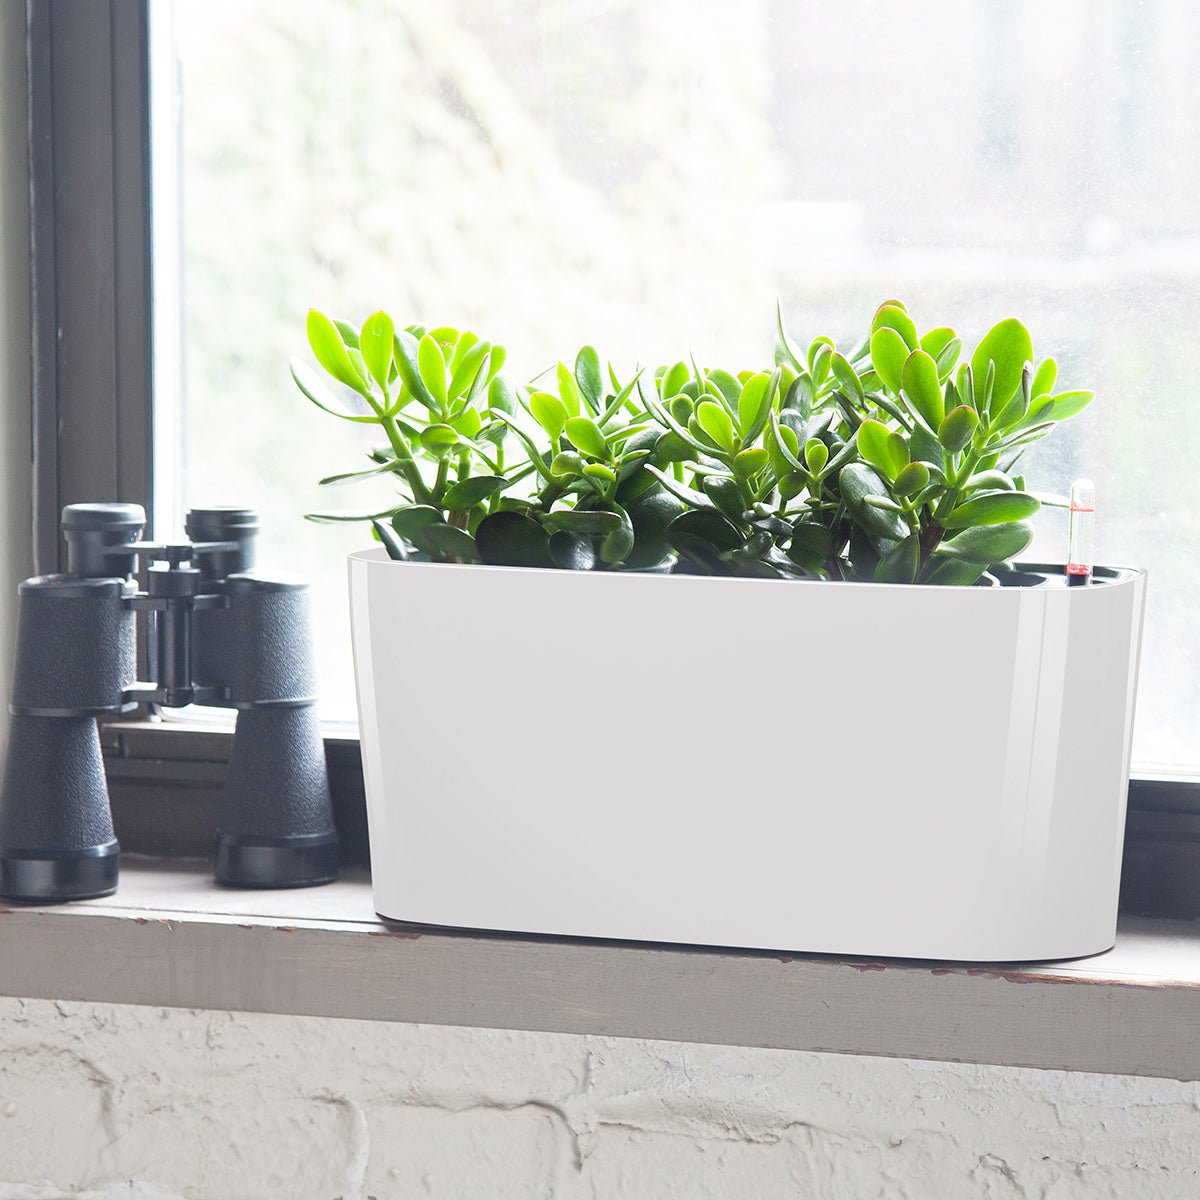 Jade Plant Potted In Lechuza Windowsill Planter - White - My City Plants